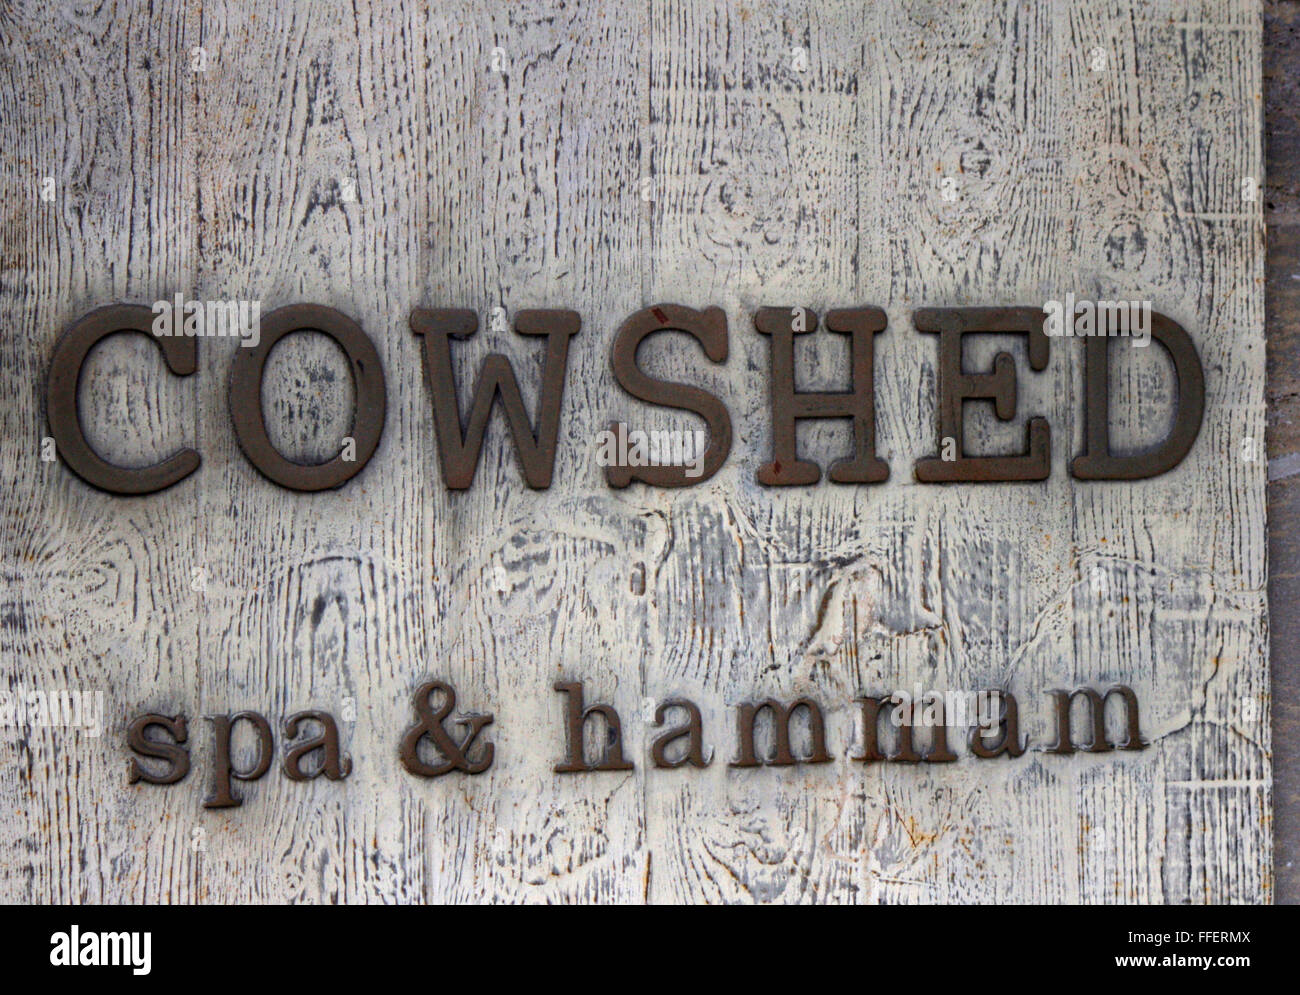 Markenname: 'Cowshed', Berlin. Stock Photo